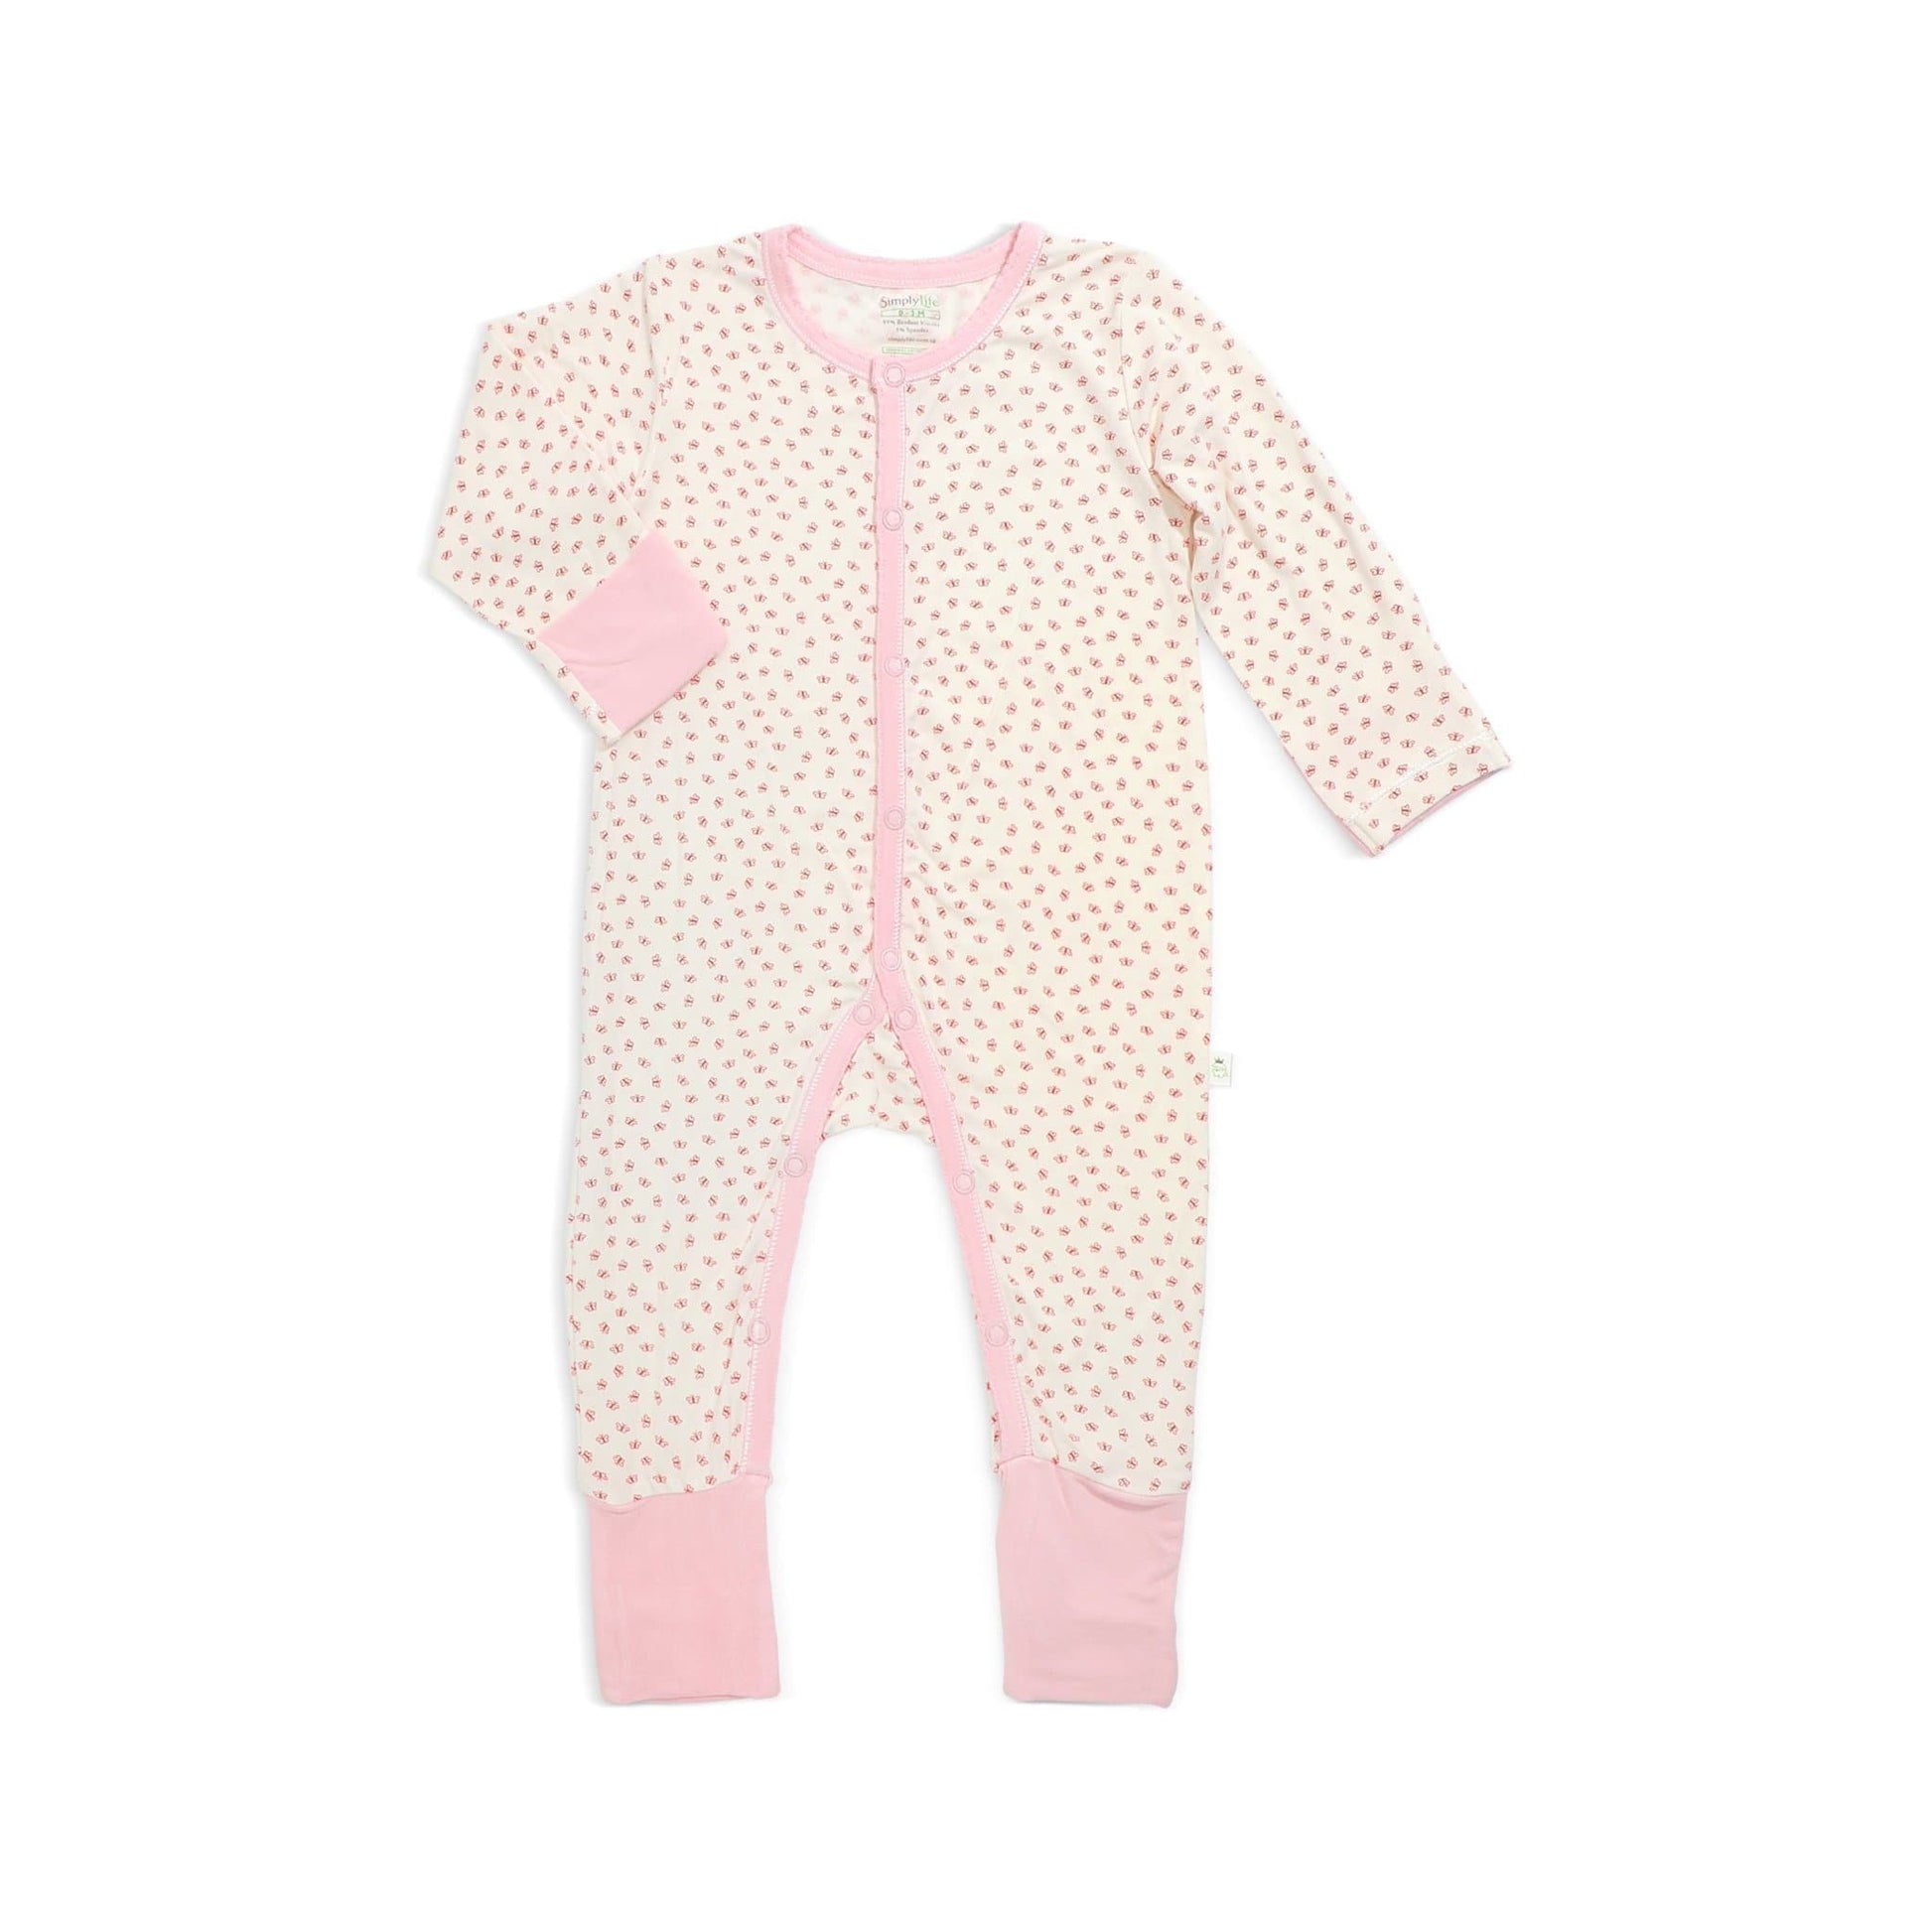 Lovely Butterflies - Long-sleeved Button Sleepsuit with Folded Mittens & Footie by simplylifebaby